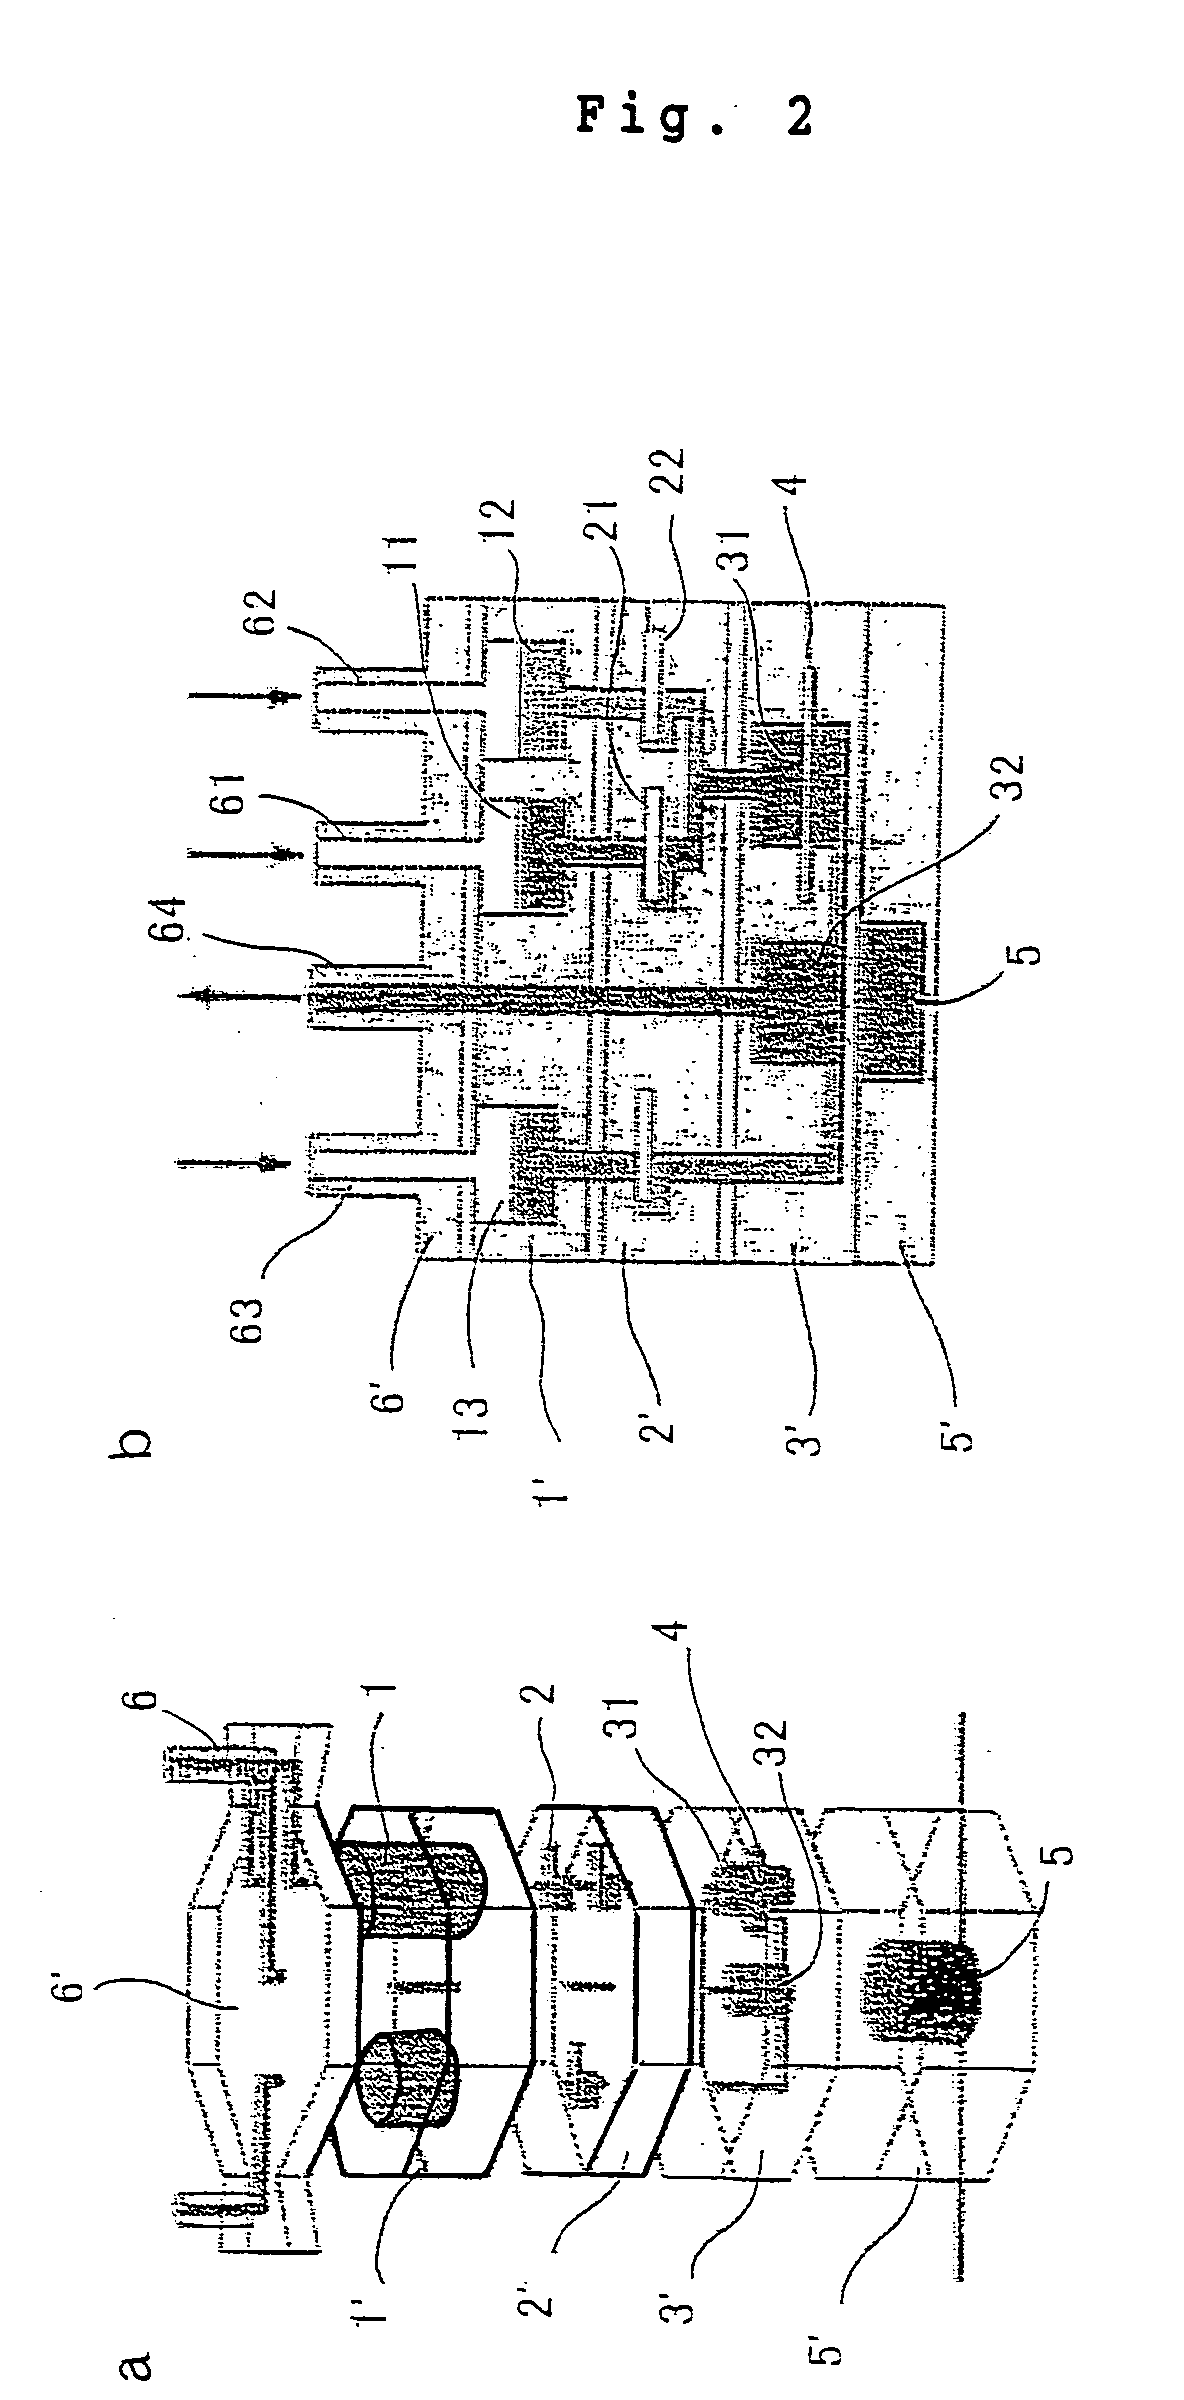 Chemical reaction circuit for cell-free protein synthesis